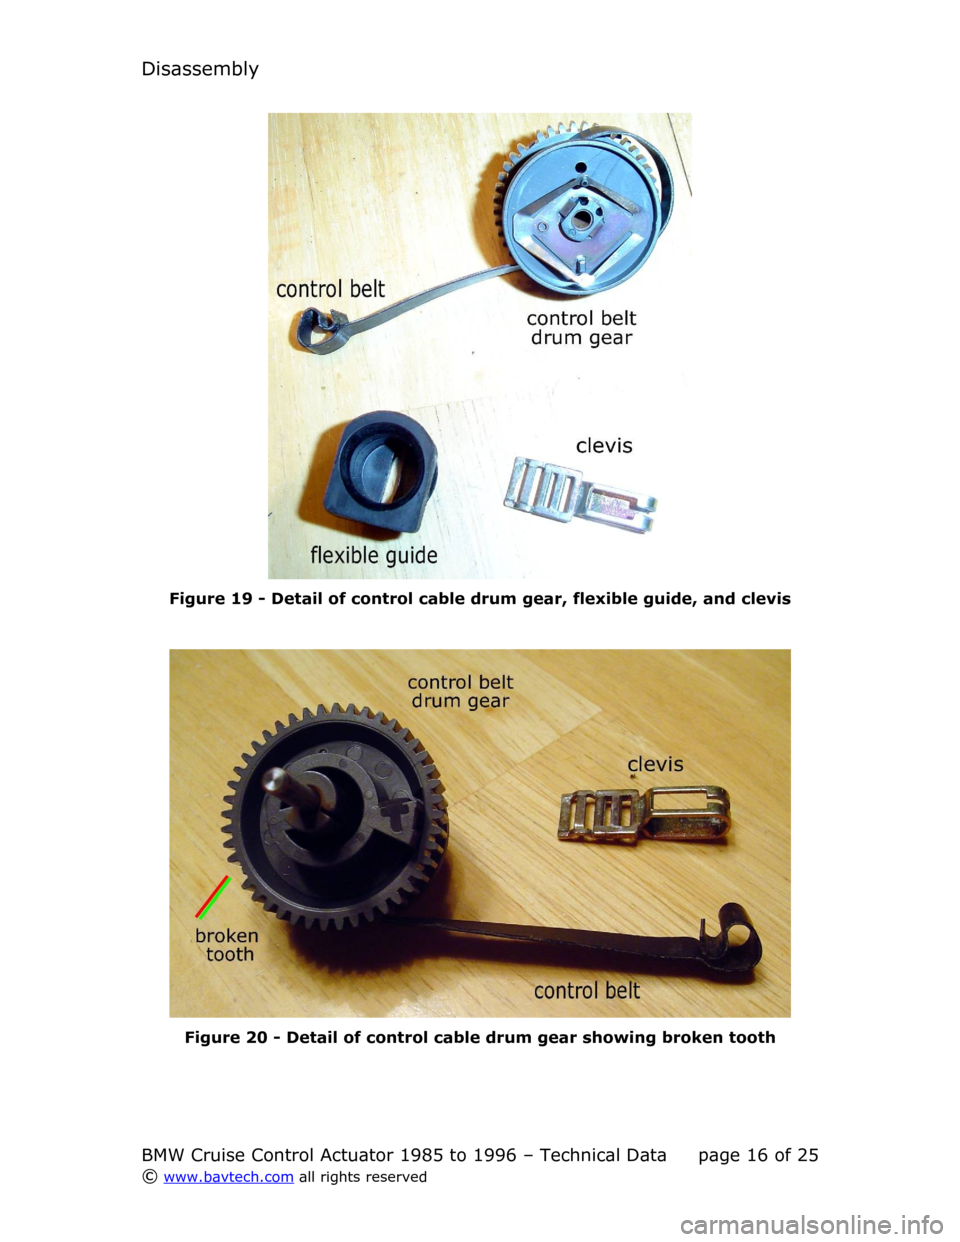 BMW 8 SERIES 1993 E31 Cruise Control Acutator Disassembly
Figure  19  - Detail of control cable drum gear, flexible guide, and clevis
Figure  20  - Detail of control cable drum gear showing broken tooth
BMW Cruise Control Actuator 1985 to 1996 �